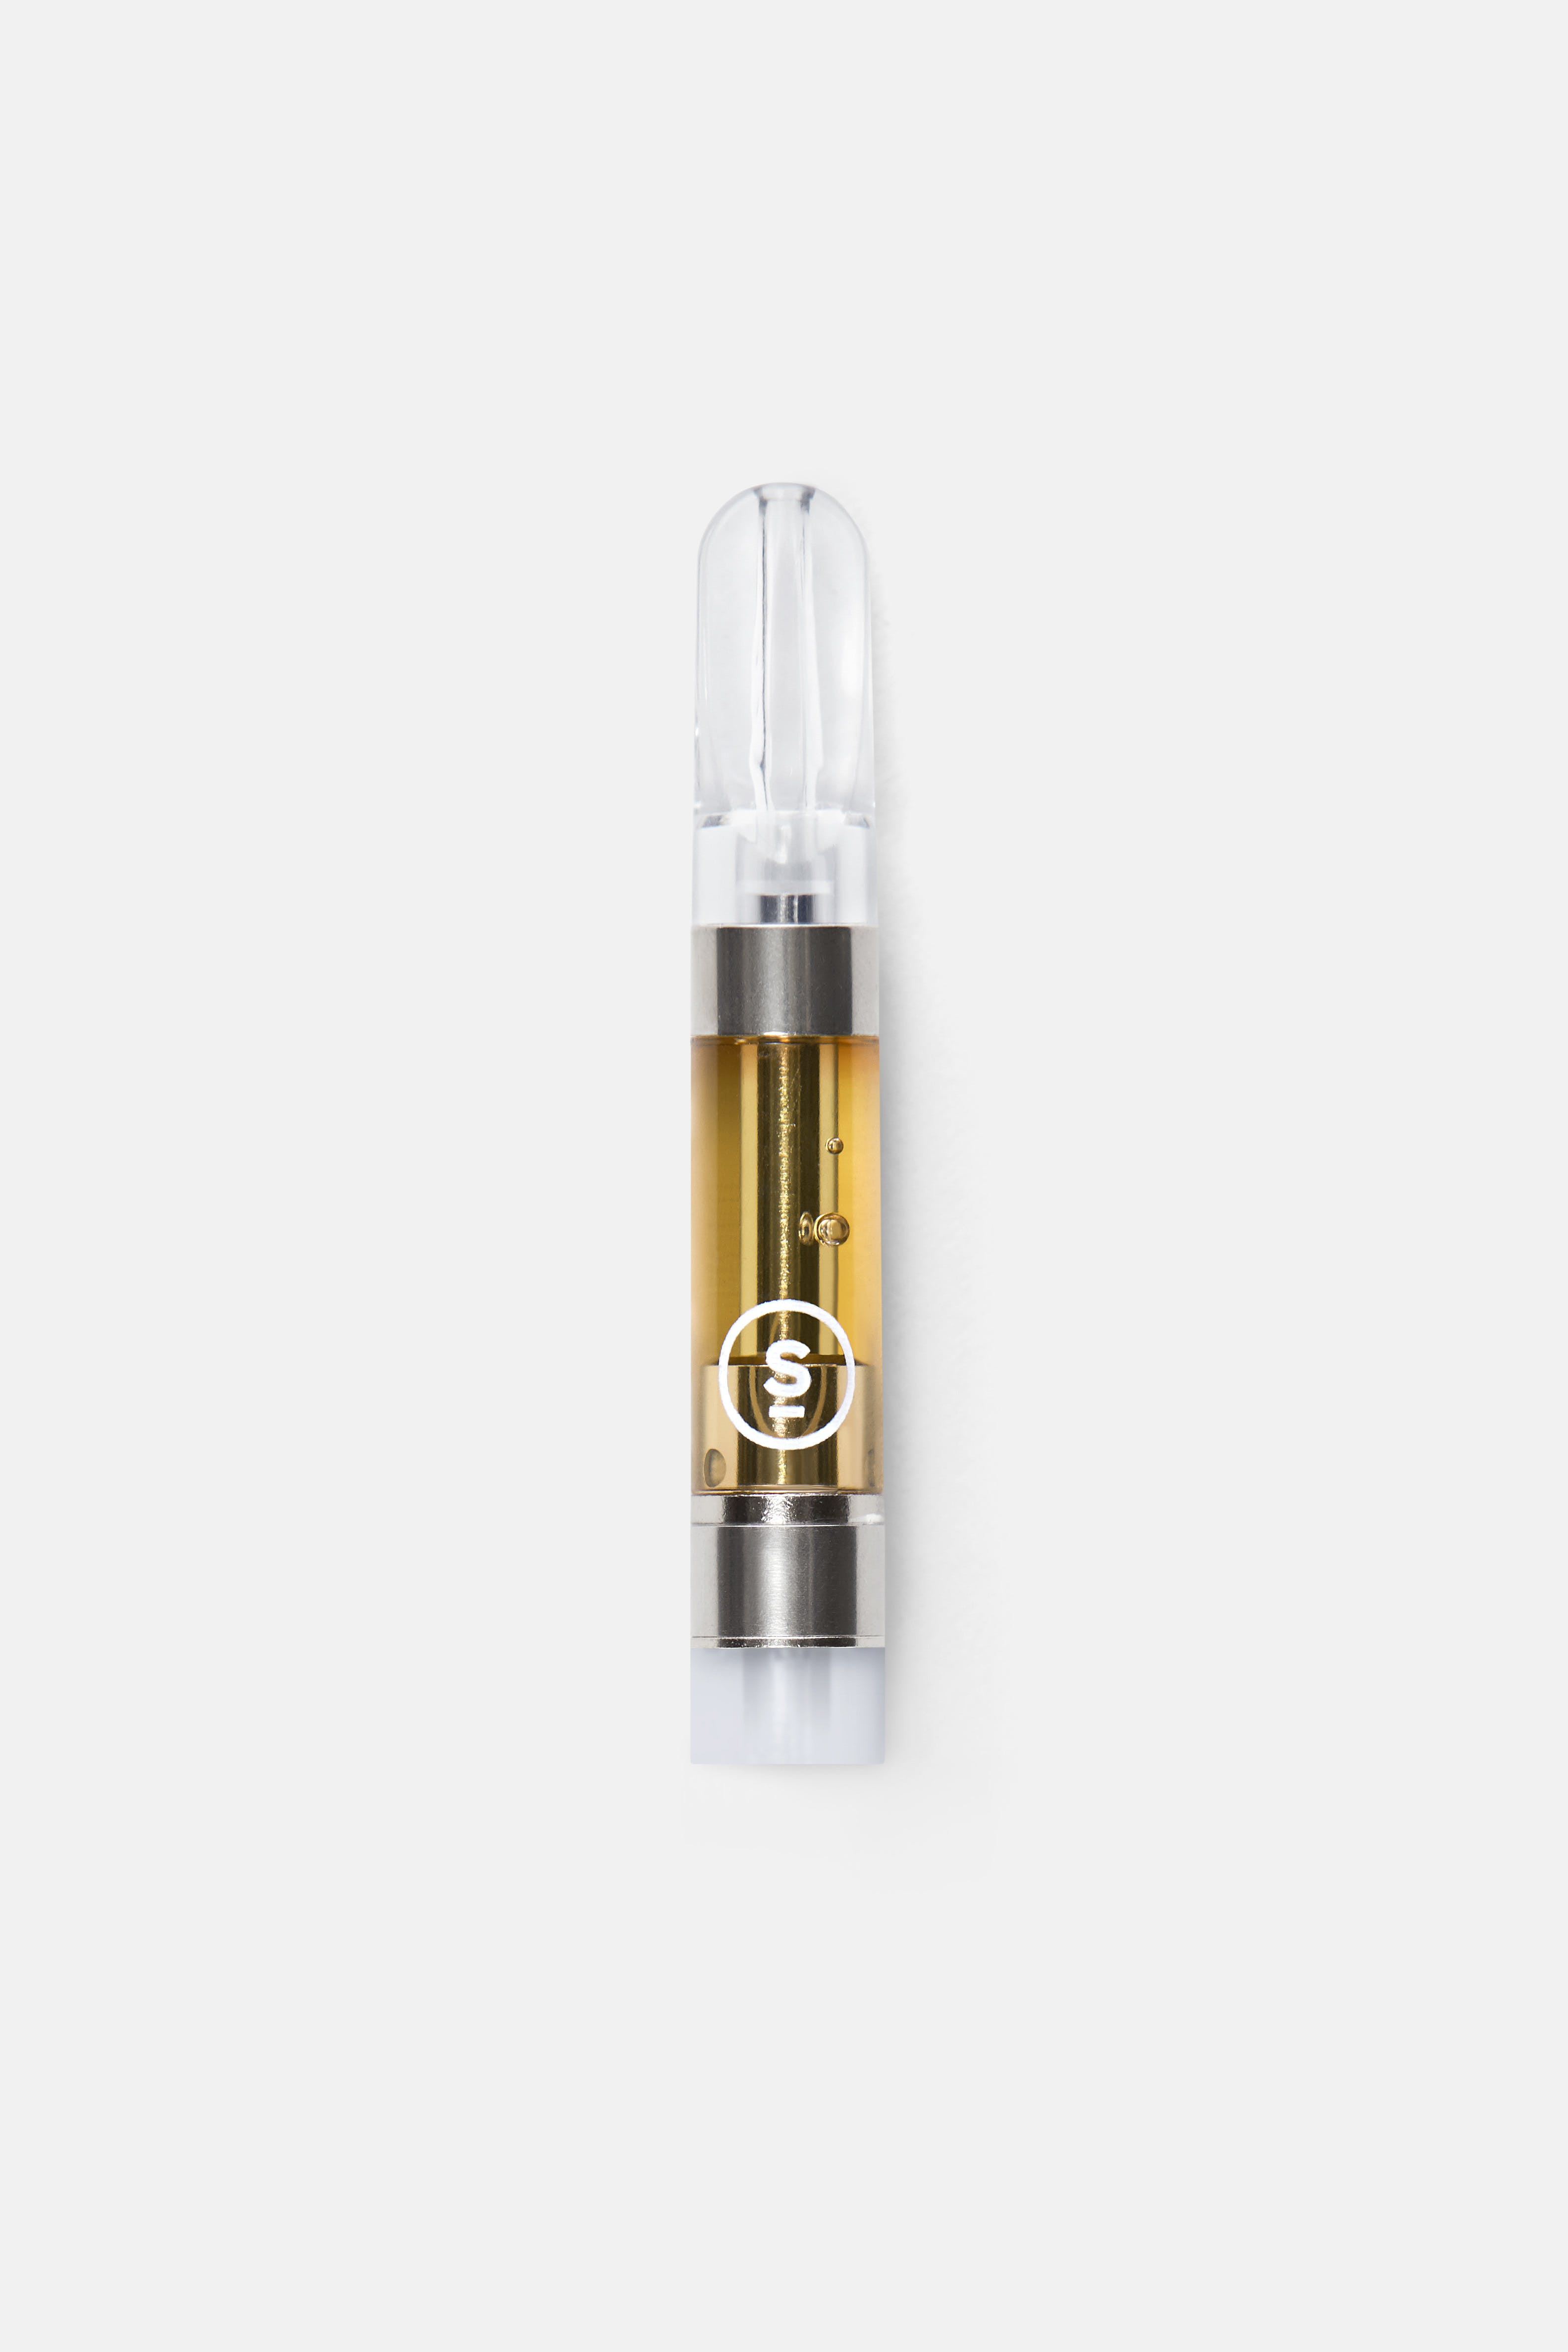 concentrate-clementine-select-vapes-1000mg